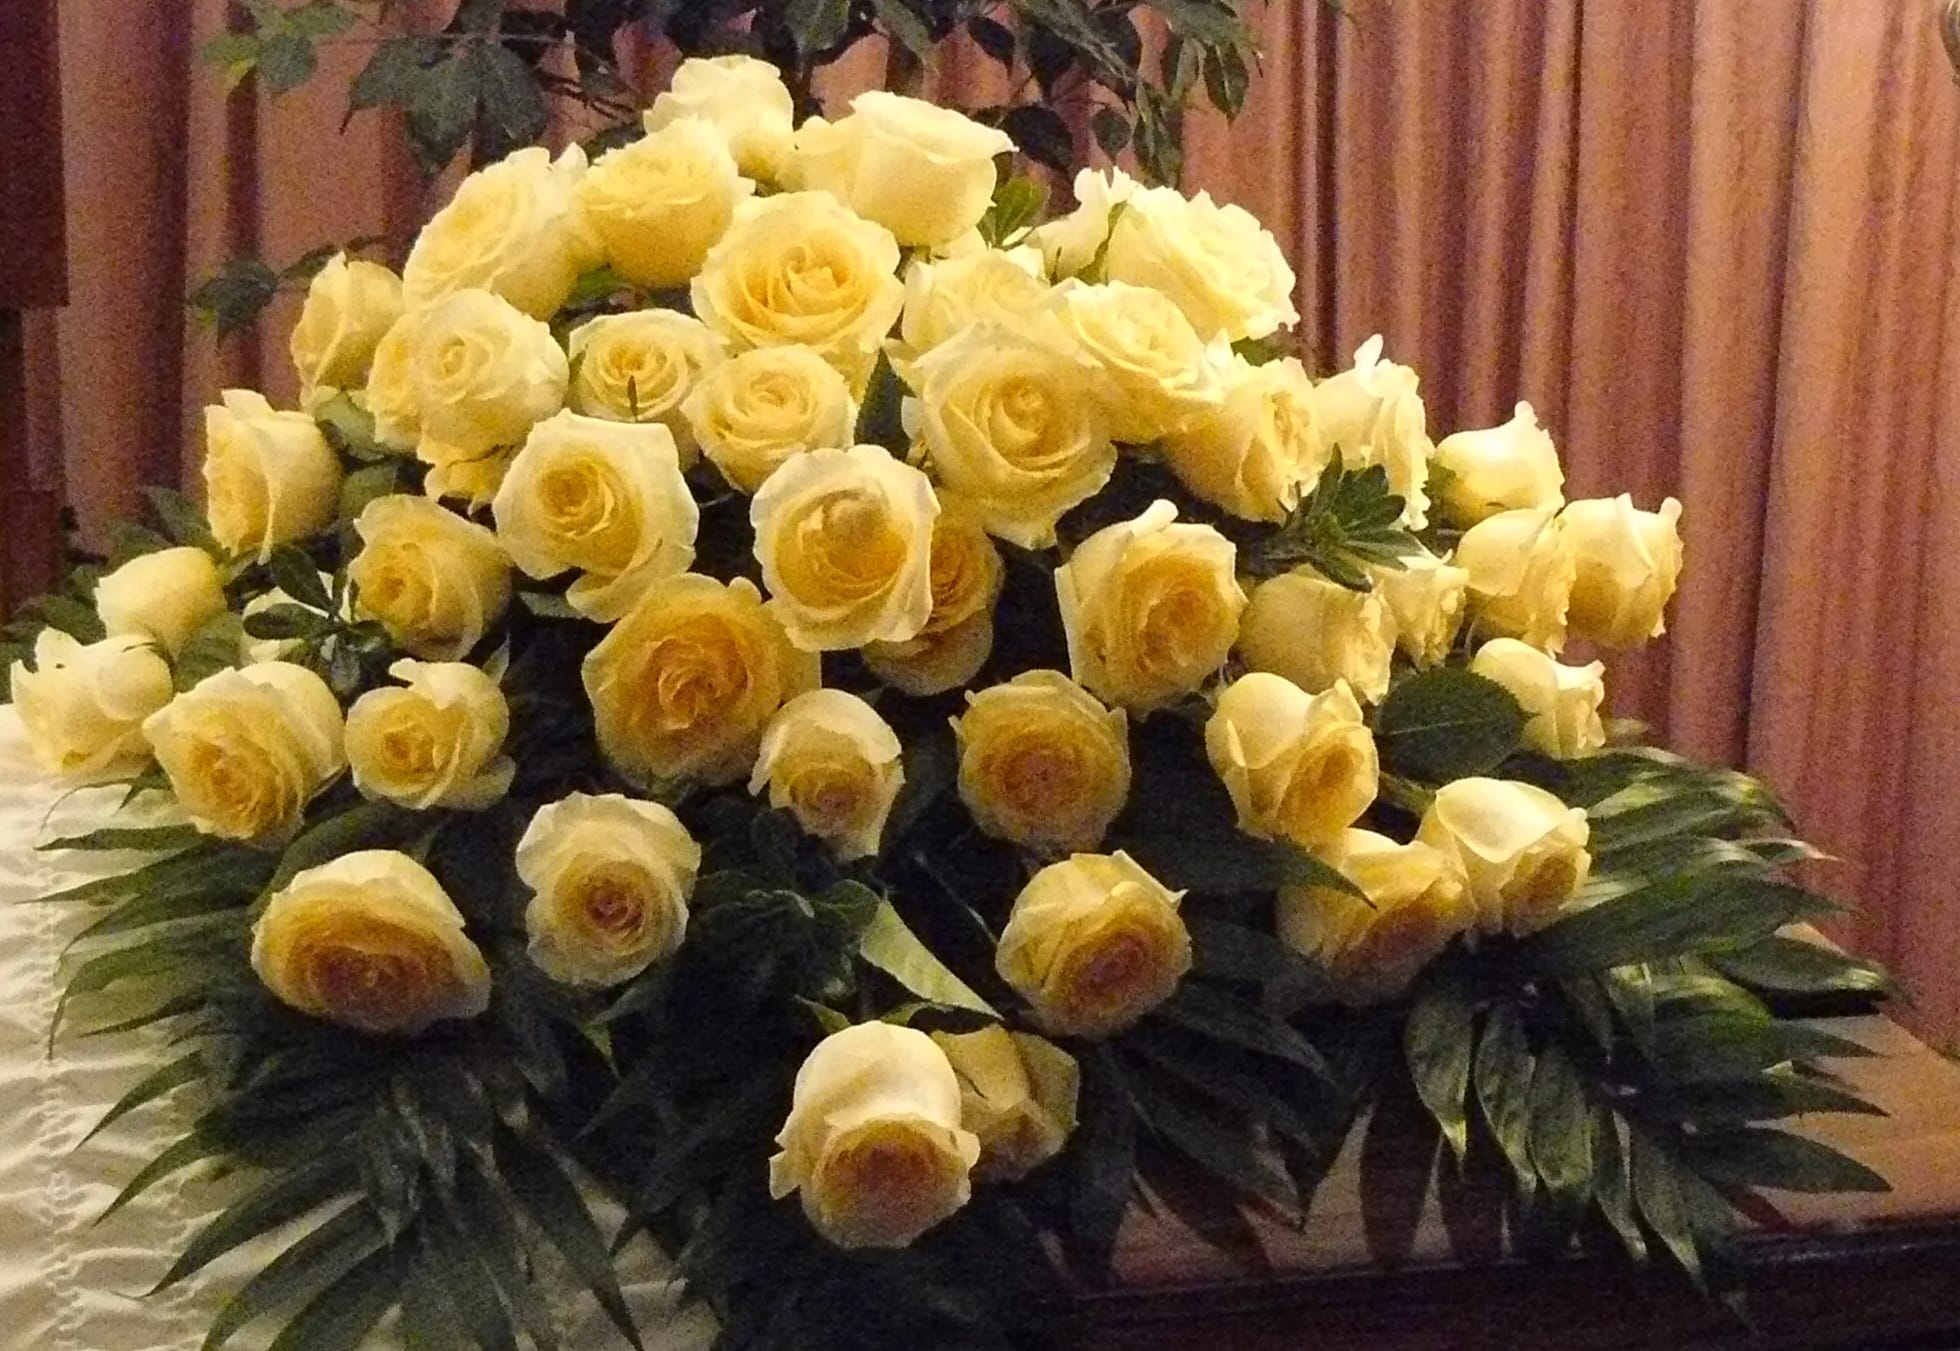 Farewell Casket  Cover   (Click on Picture for Best View) - Pale Yellow  Roses(Candlellight) ,  Palms, Fancy Greens are elegantly arranged among an assortment of lush greens to create a sophisticated display meant to bedeck the top of their casket at the final memorial service. Your purchase includes a complimentary personalized gift message.